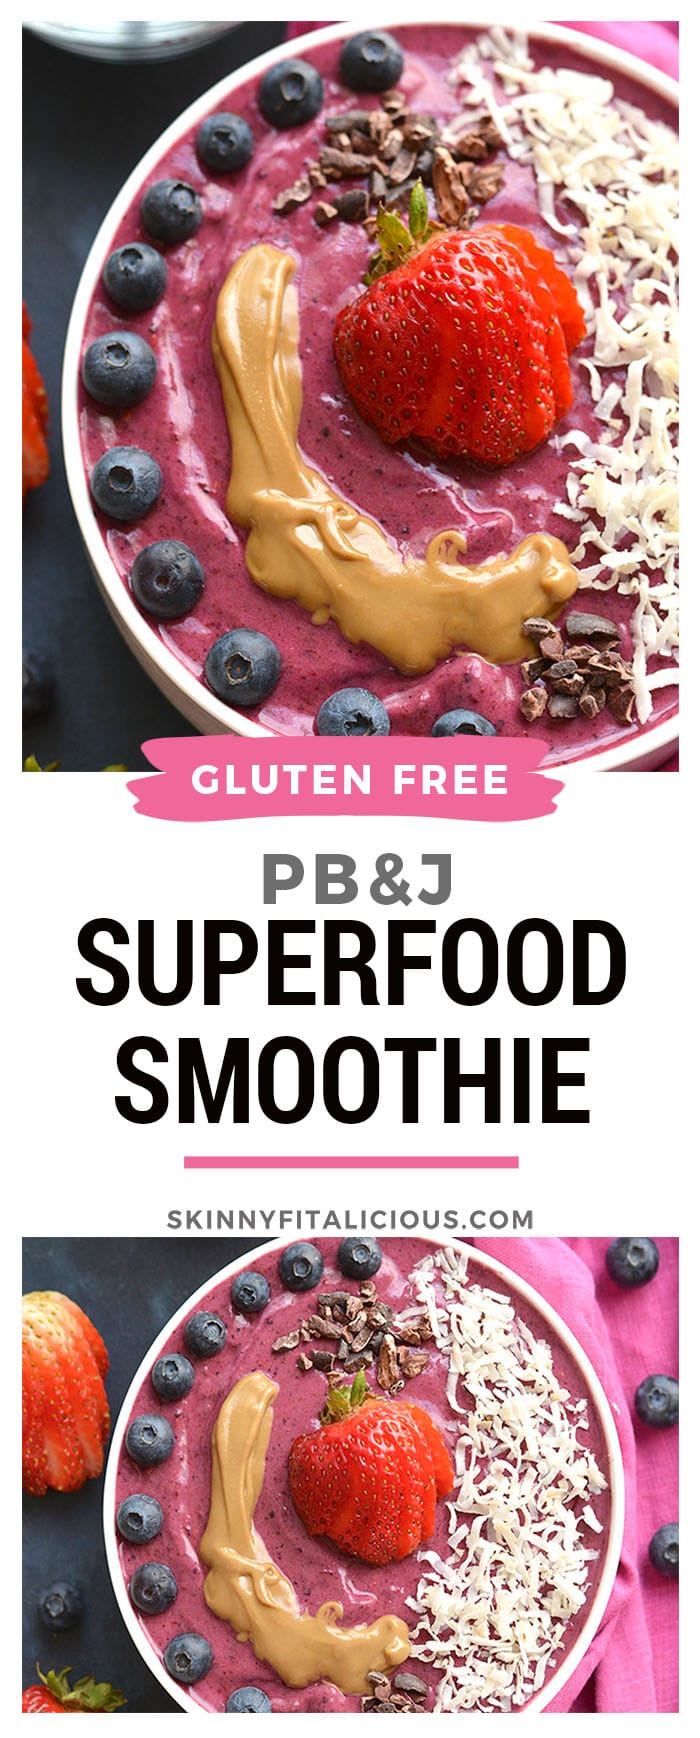 A tasty PB&J Superfood Smoothie made with acai, protein powder, fruit, nut butter, Greek yogurt & more! A vitamin & mineral packed breakfast or snack, resembling a favorite childhood sandwich. Gluten Free + Low Calorie!